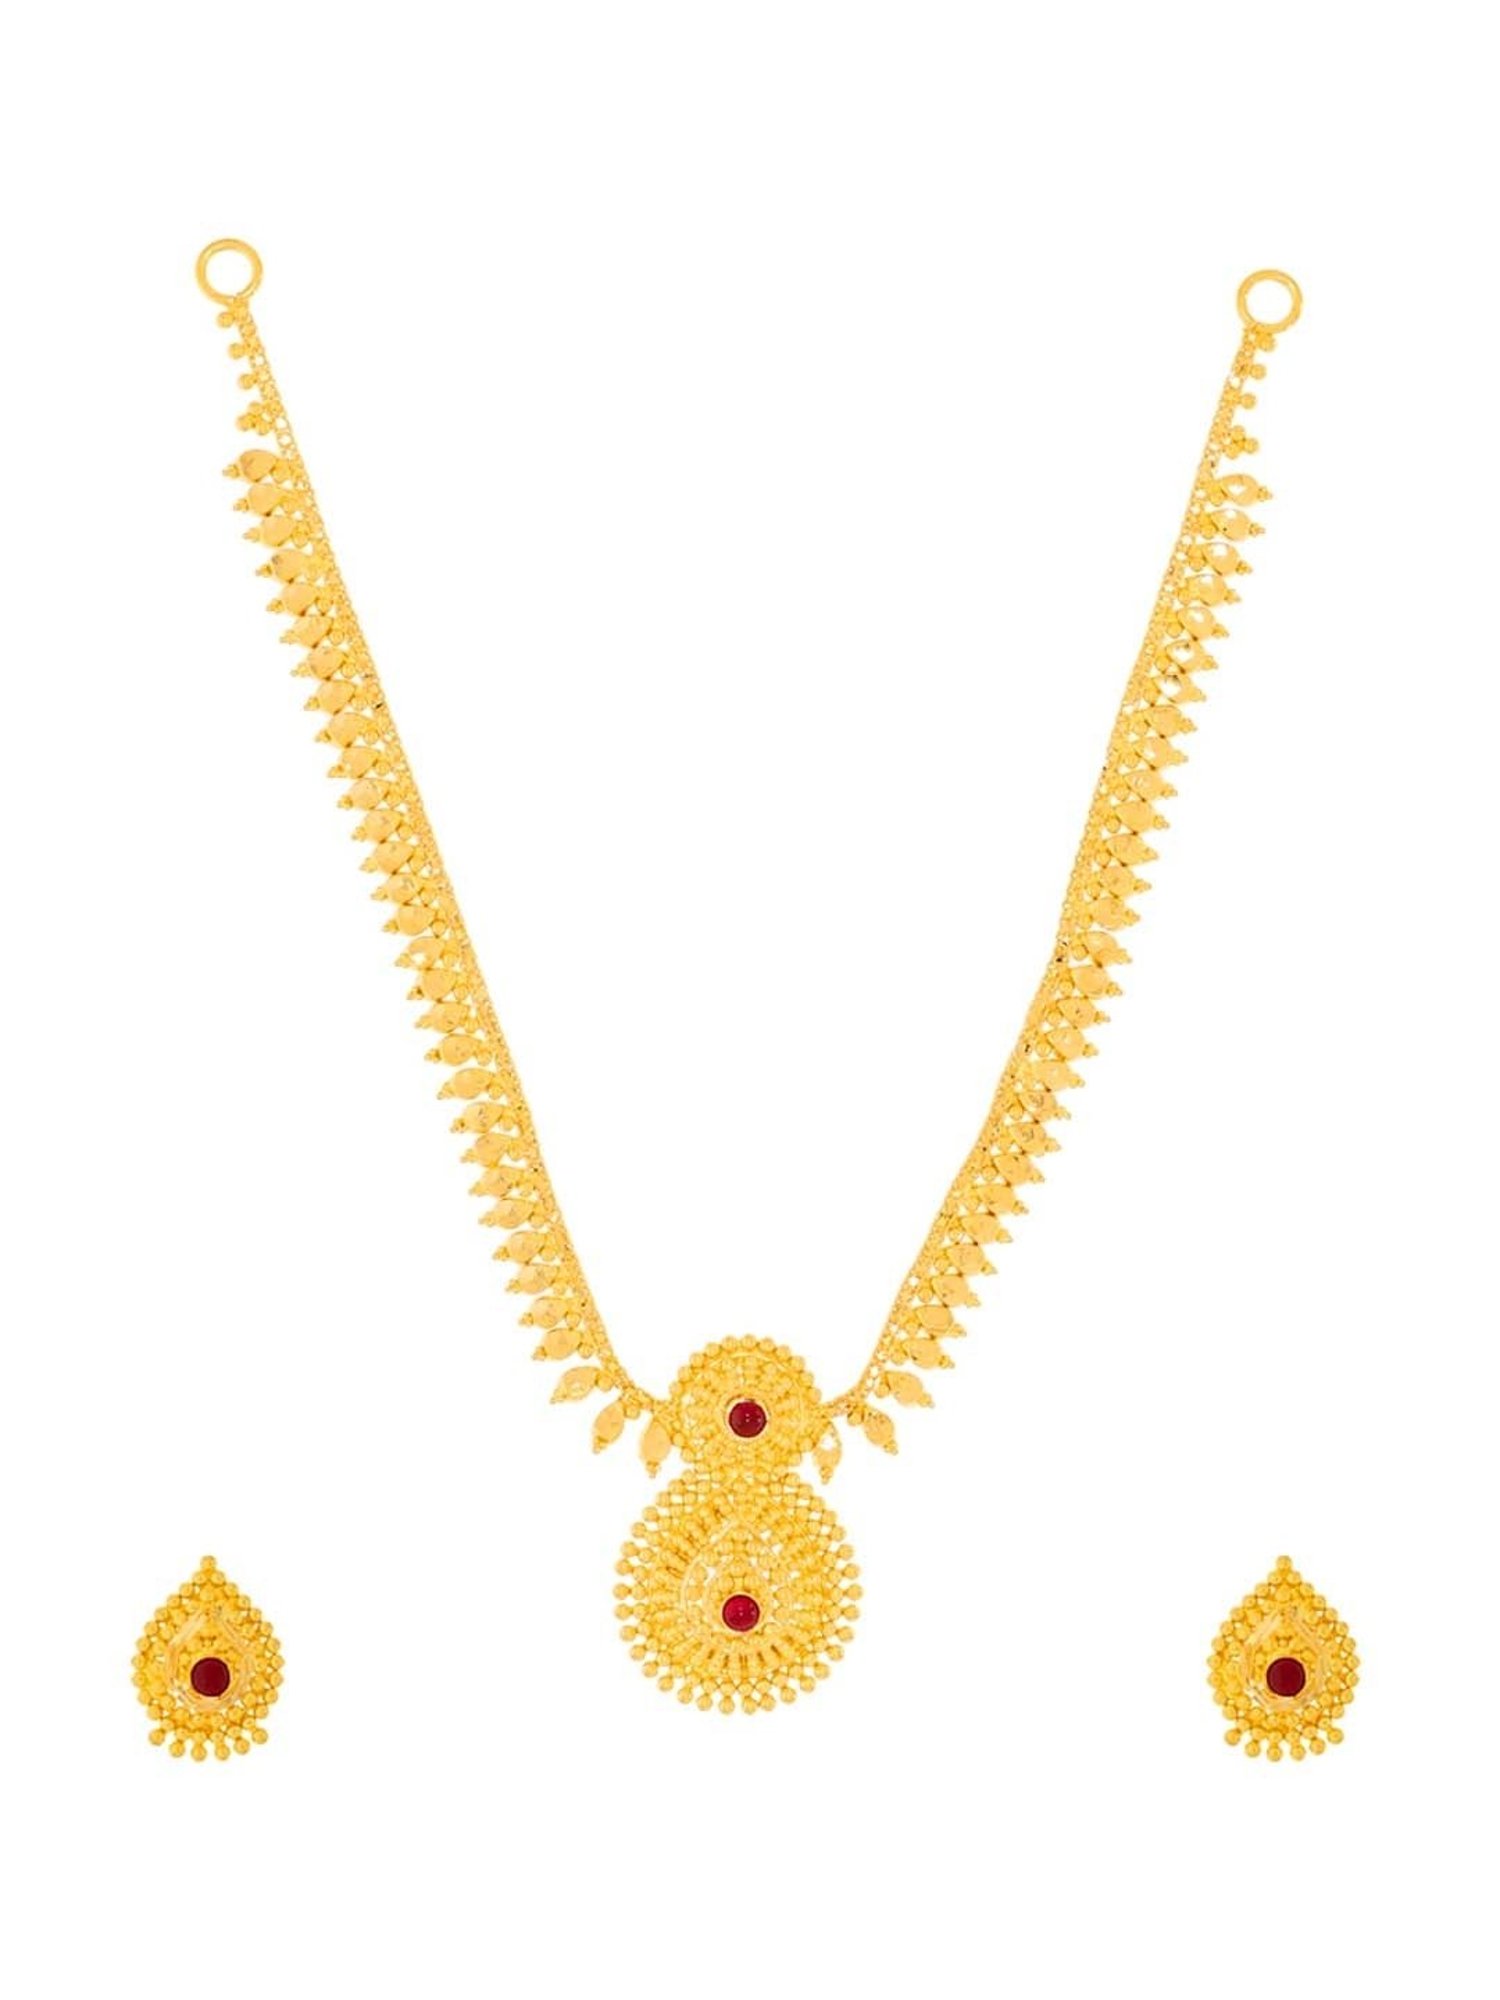 Waman Hari Pethe Sons on Instagram: “An #traditonal #Mangalsutra from… |  Gold mangalsutra designs, Indian gold necklace designs, Gold necklace  indian bridal jewelry